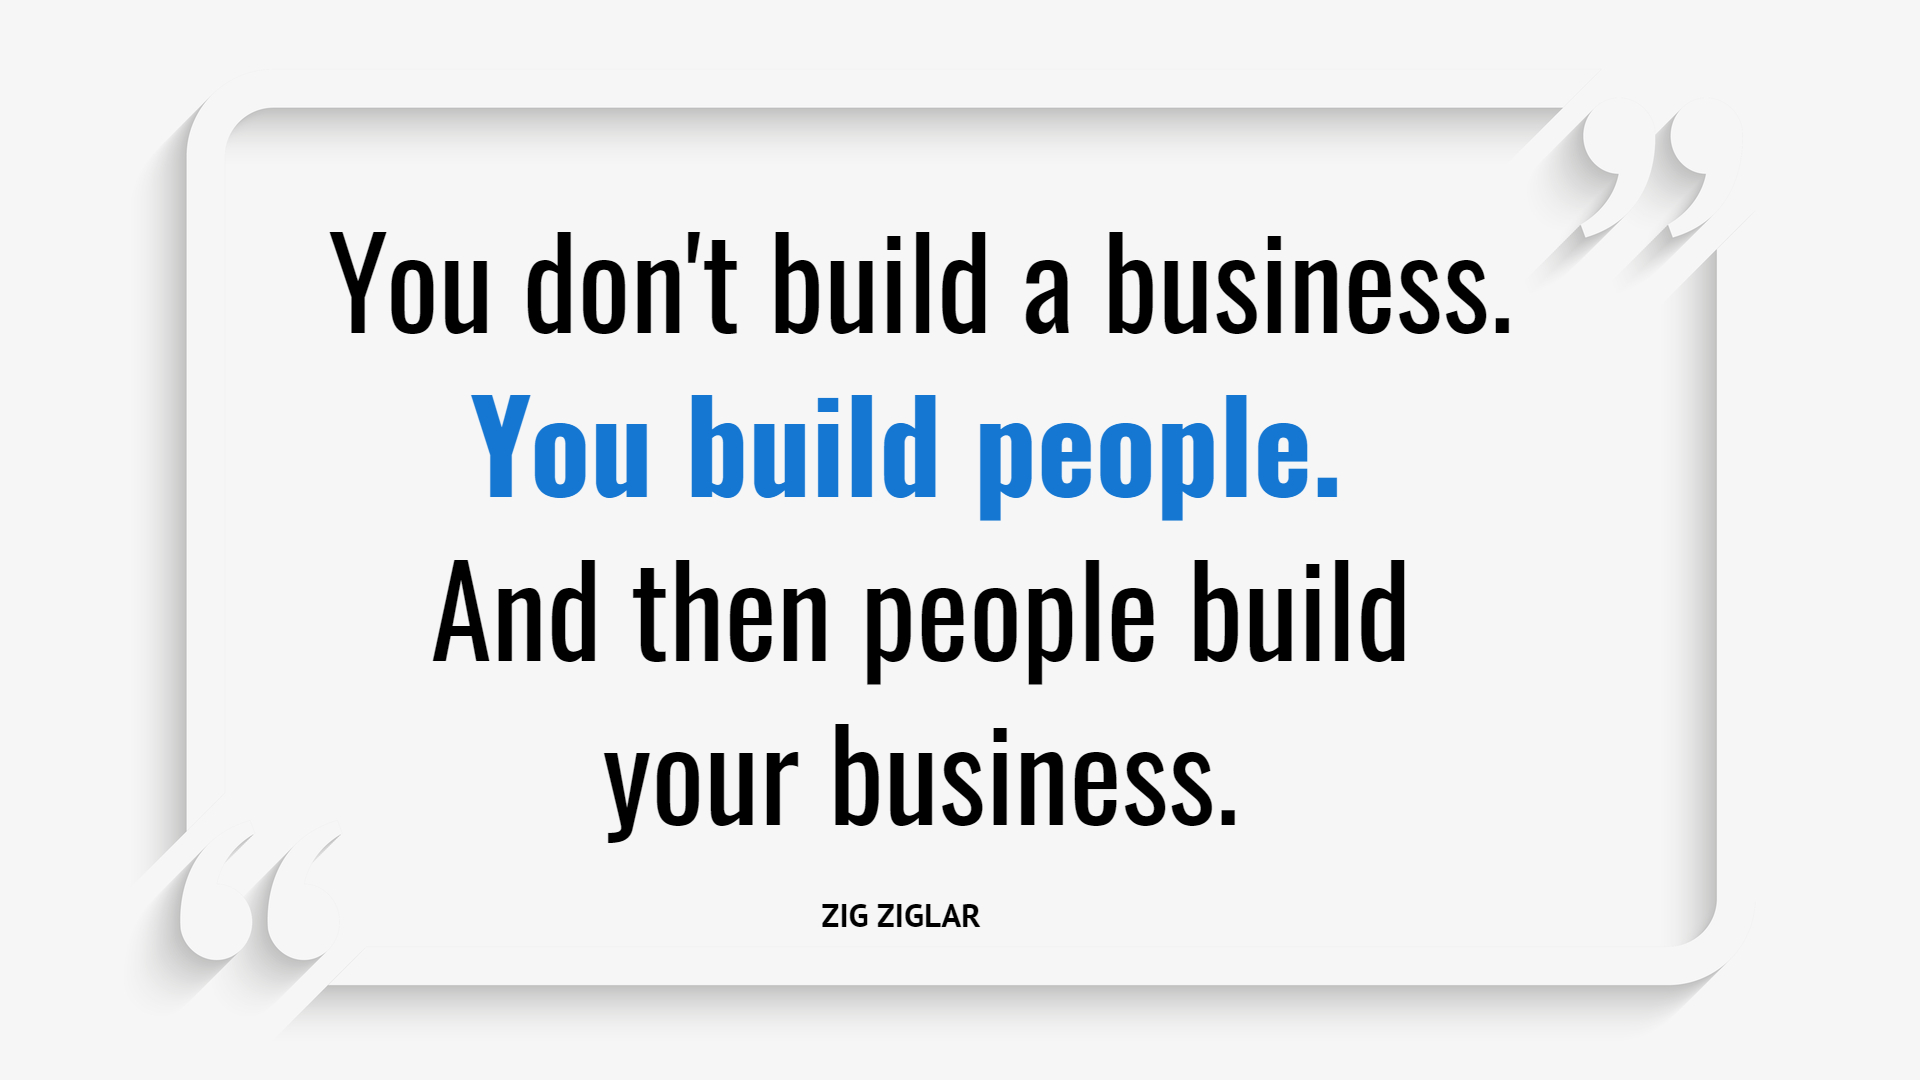 Build people and people build your business quote